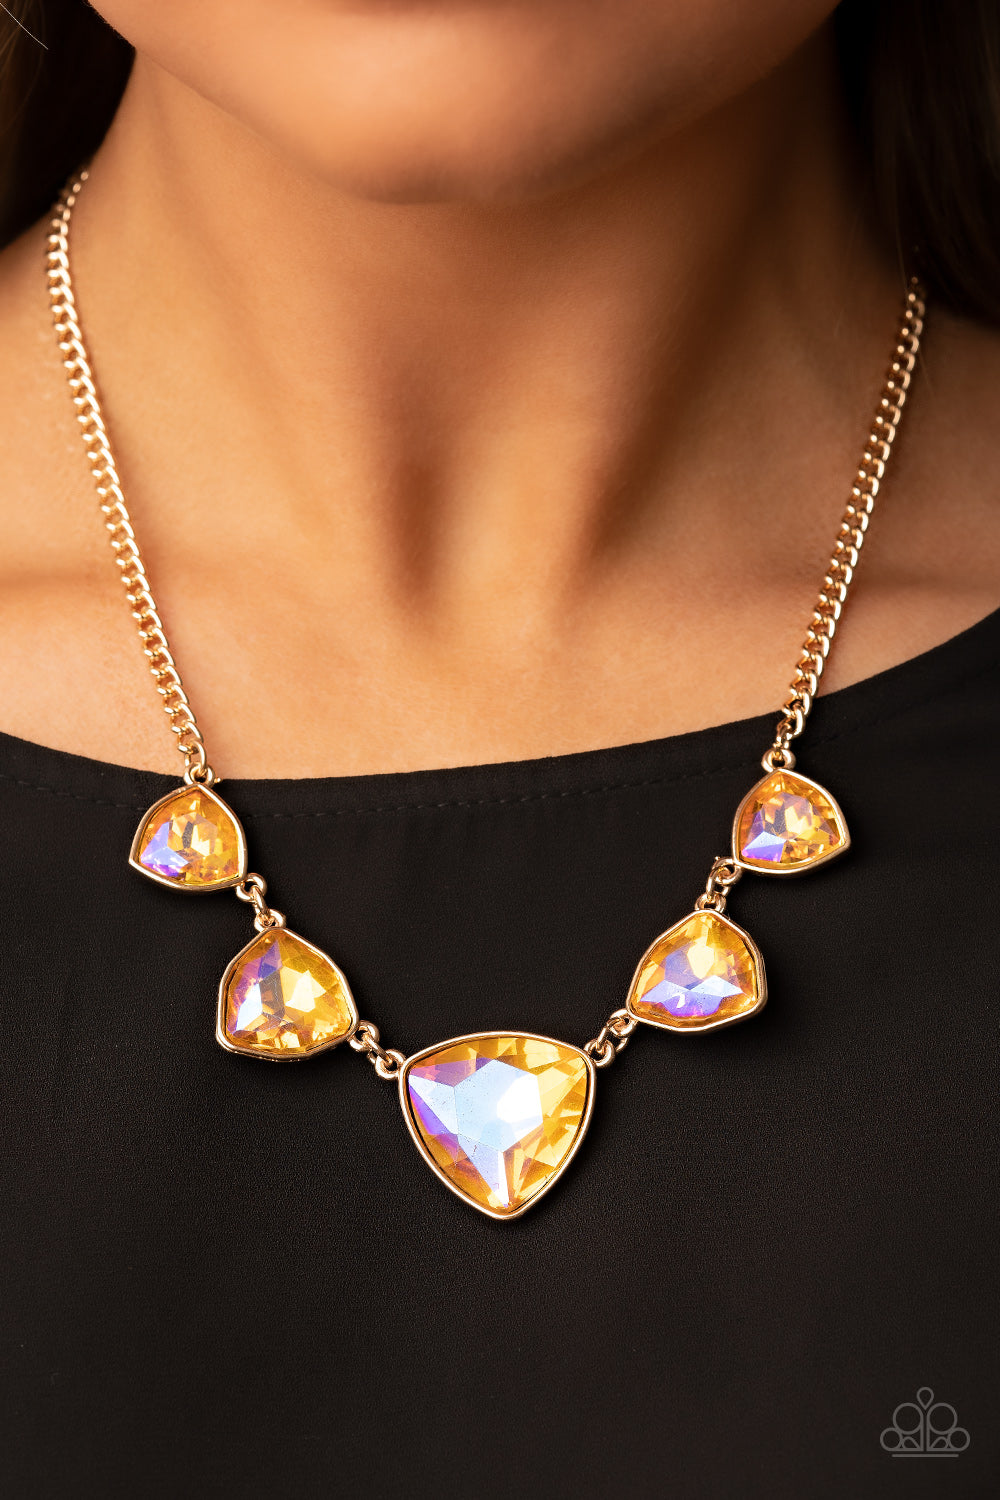 Paparazzi Cosmic Constellations - Gold Gem Necklaces encased in sleek gold fittings, an oversized collection of UV geometric gems gradually increase in size as they link below the collar for a golden statement. Features an adjustable clasp closure.  Sold as one individual necklace. Includes one pair of matching earrings.